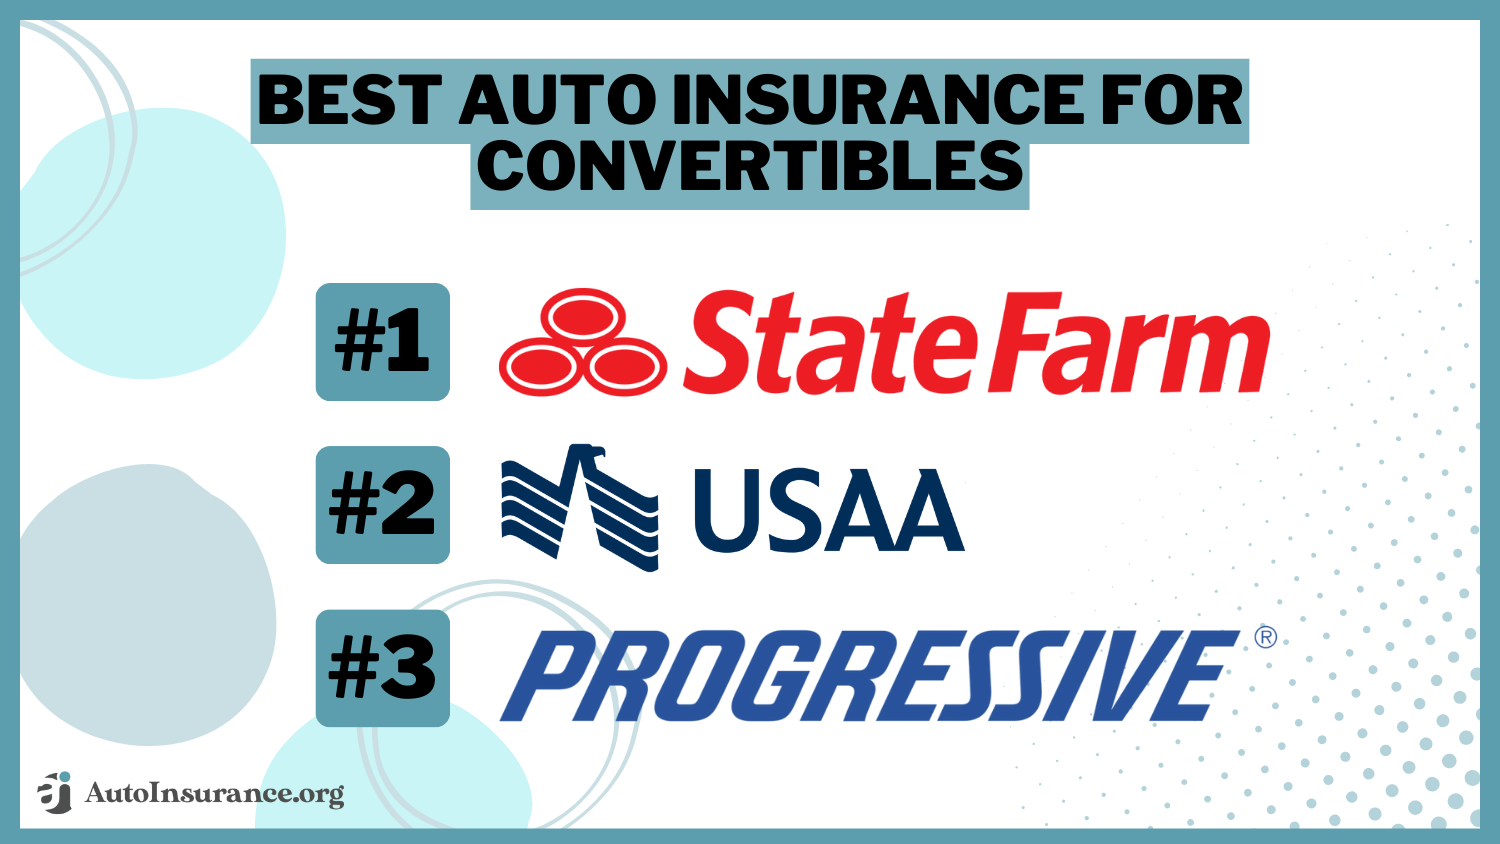 Best Auto Insurance for Convertibles: State Farm, USAA, and Progressive